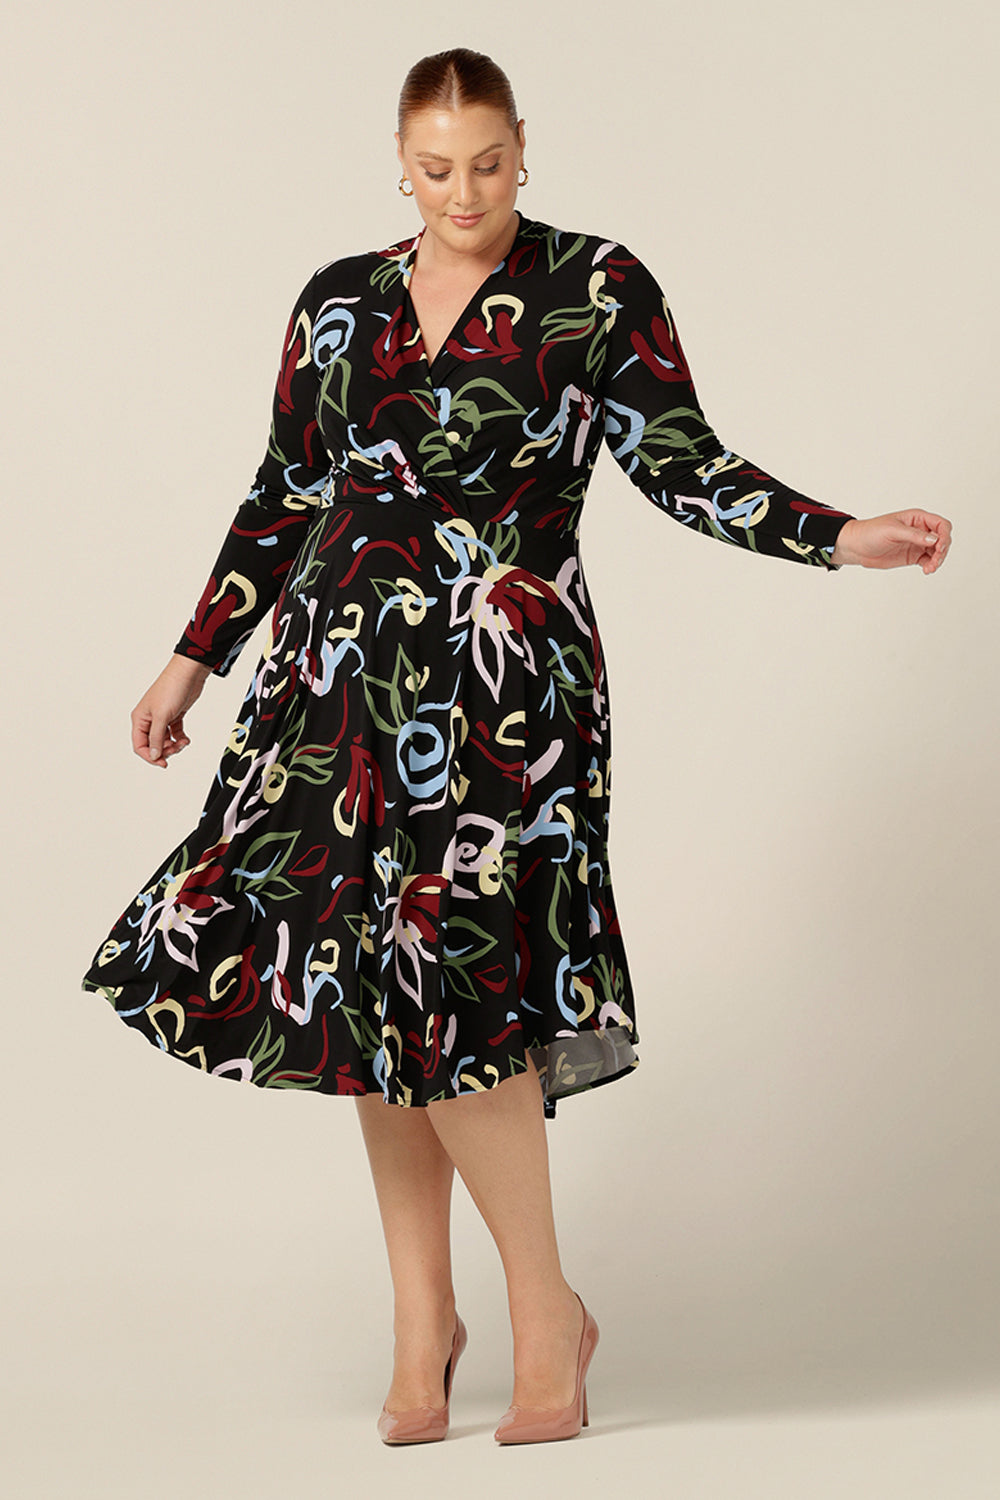 A size 18, plus size woman wears a knee length work dress with crossover bodice and full length sleeves made by Australian and New Zealand women's clothing label, Leina and Fleur..